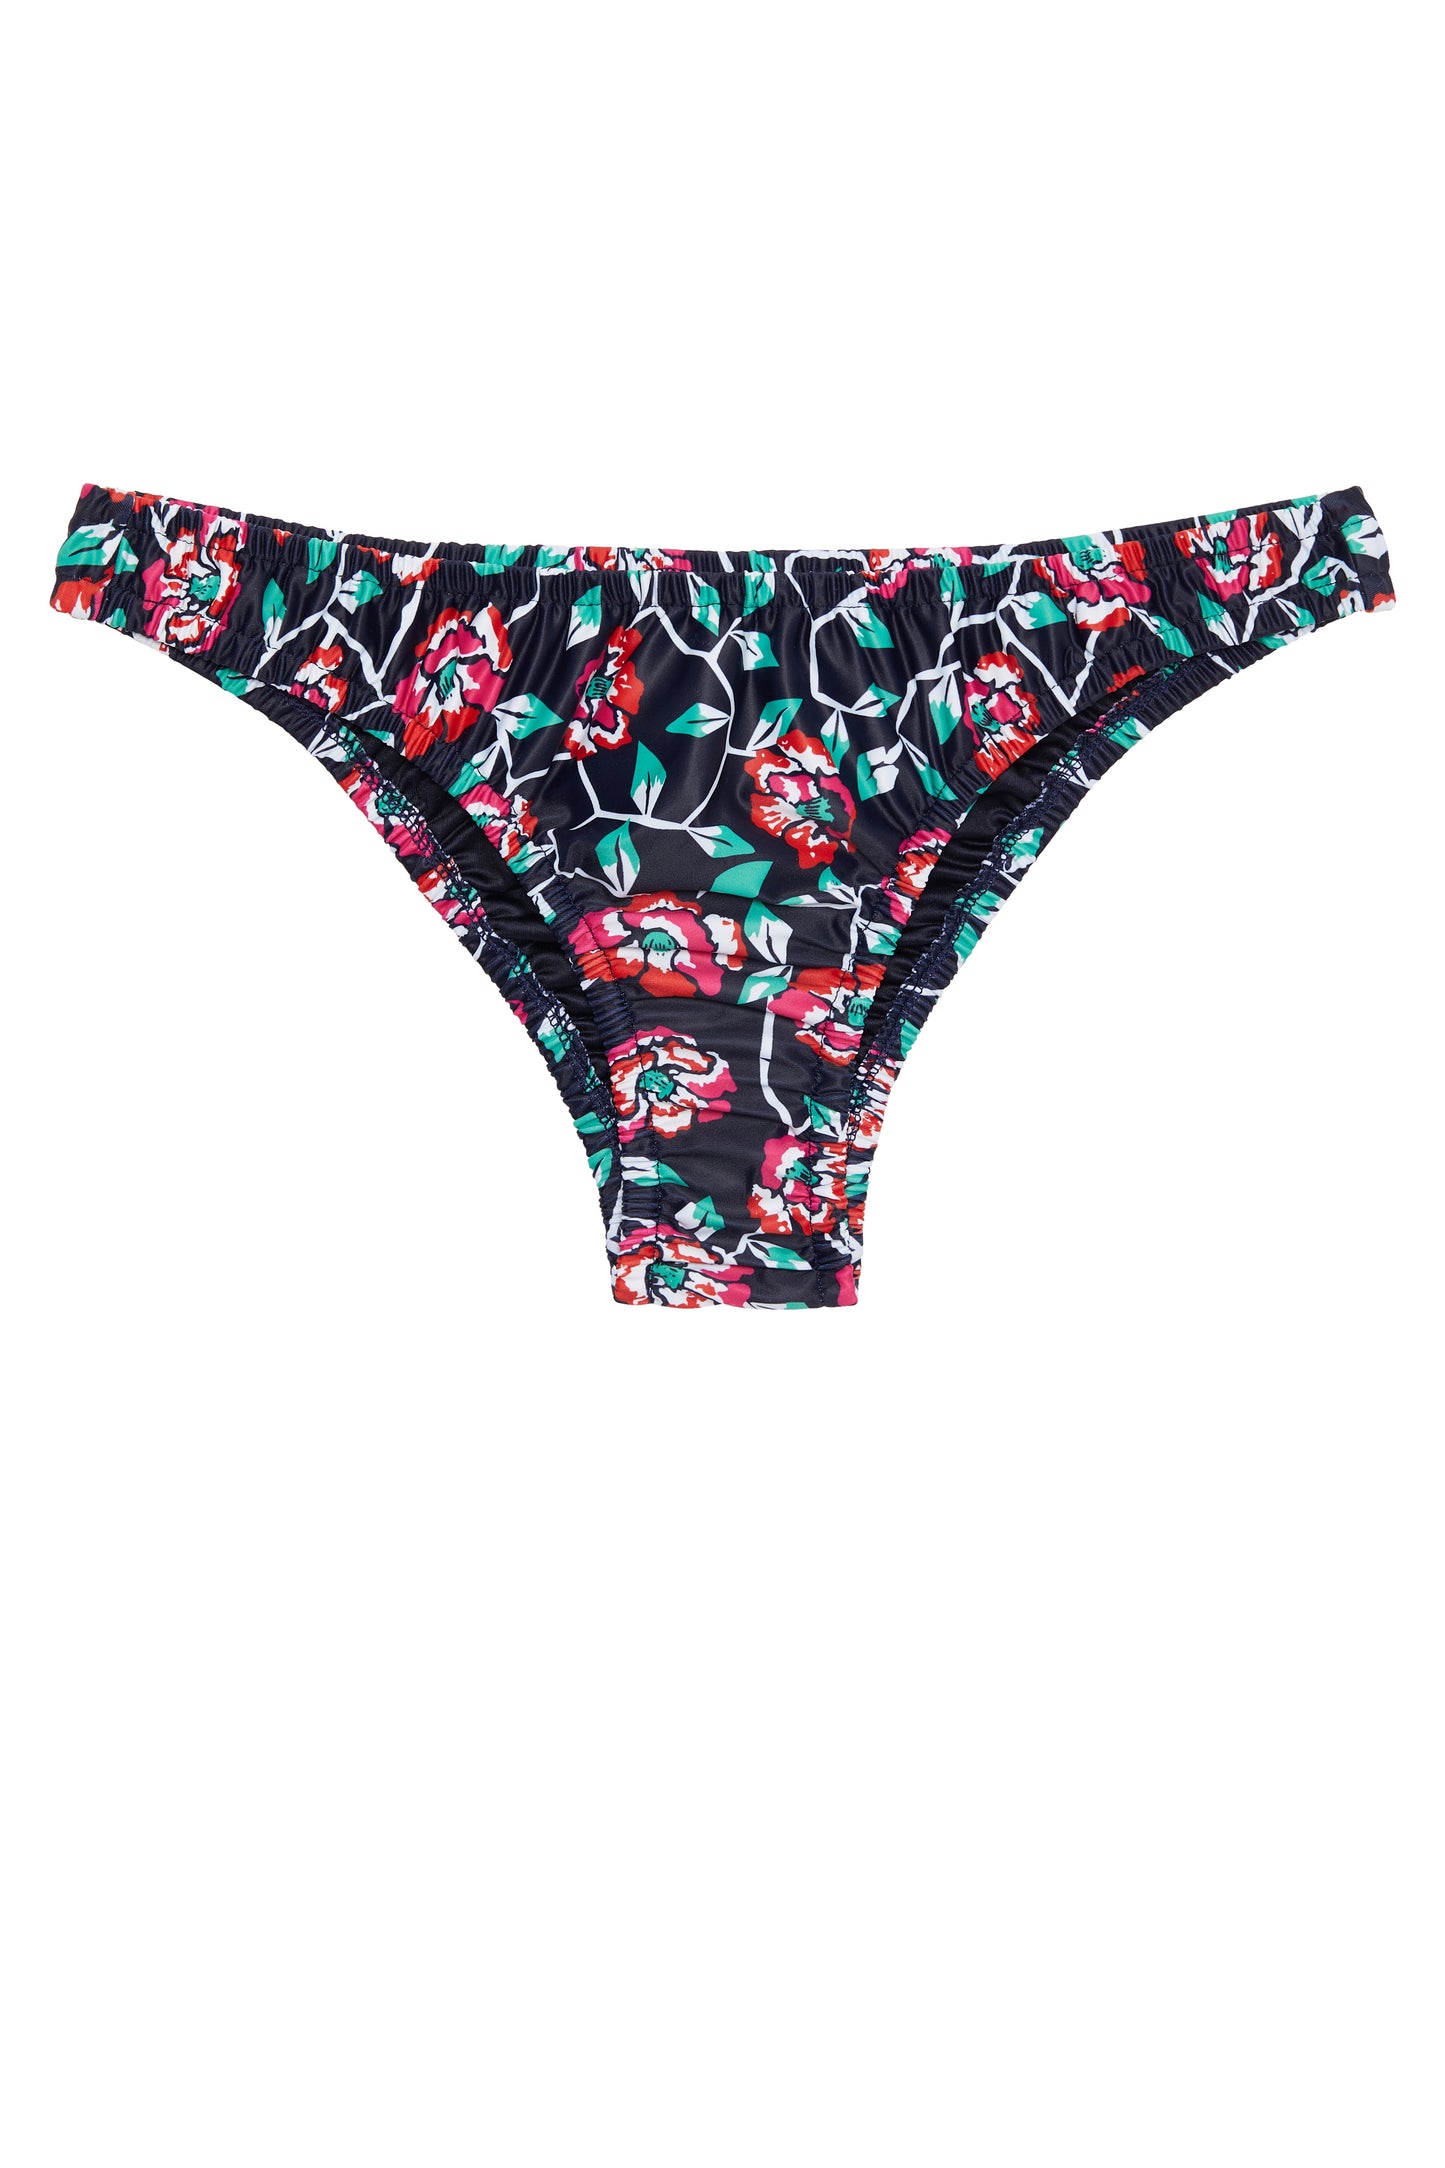 Vice Bottom in Navy Floral